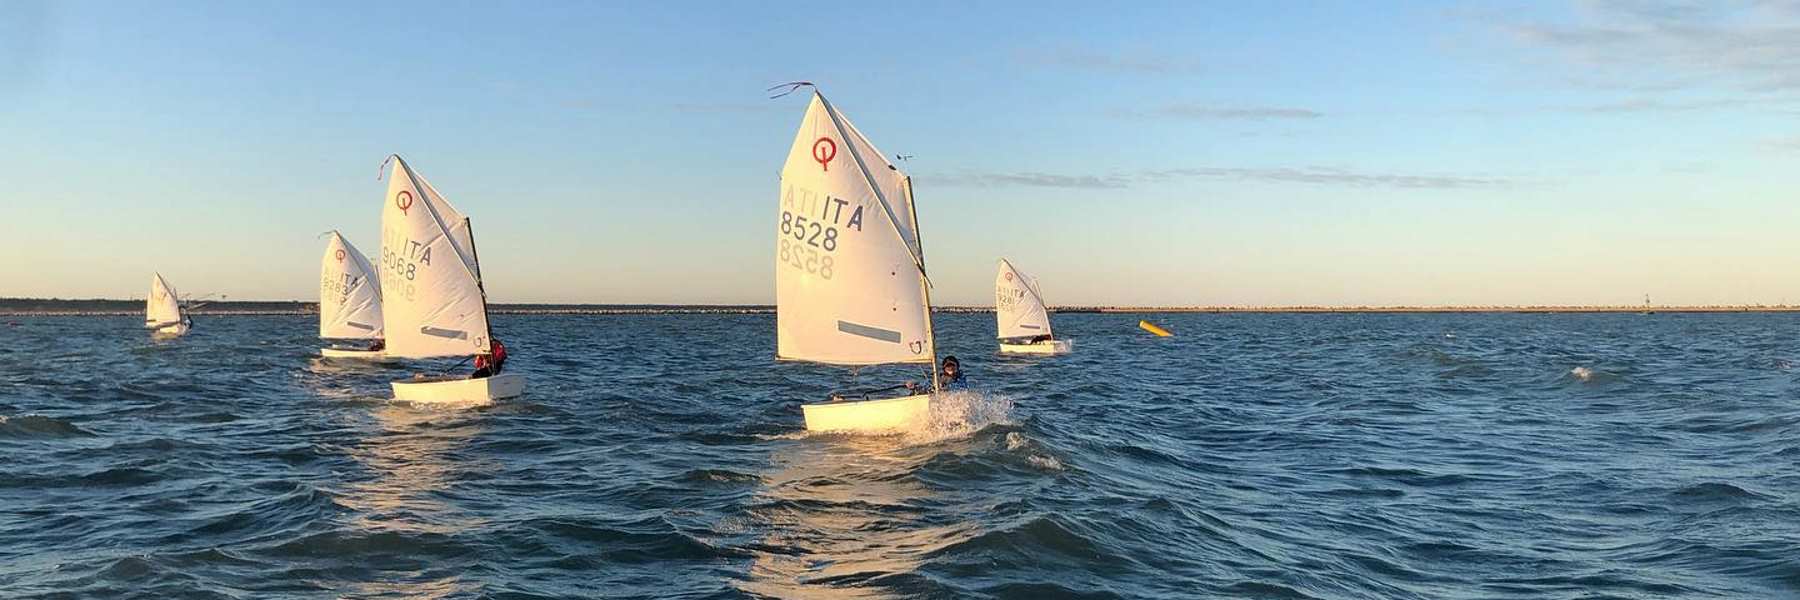 Cervia Sailing Centre - Regattas in July and August